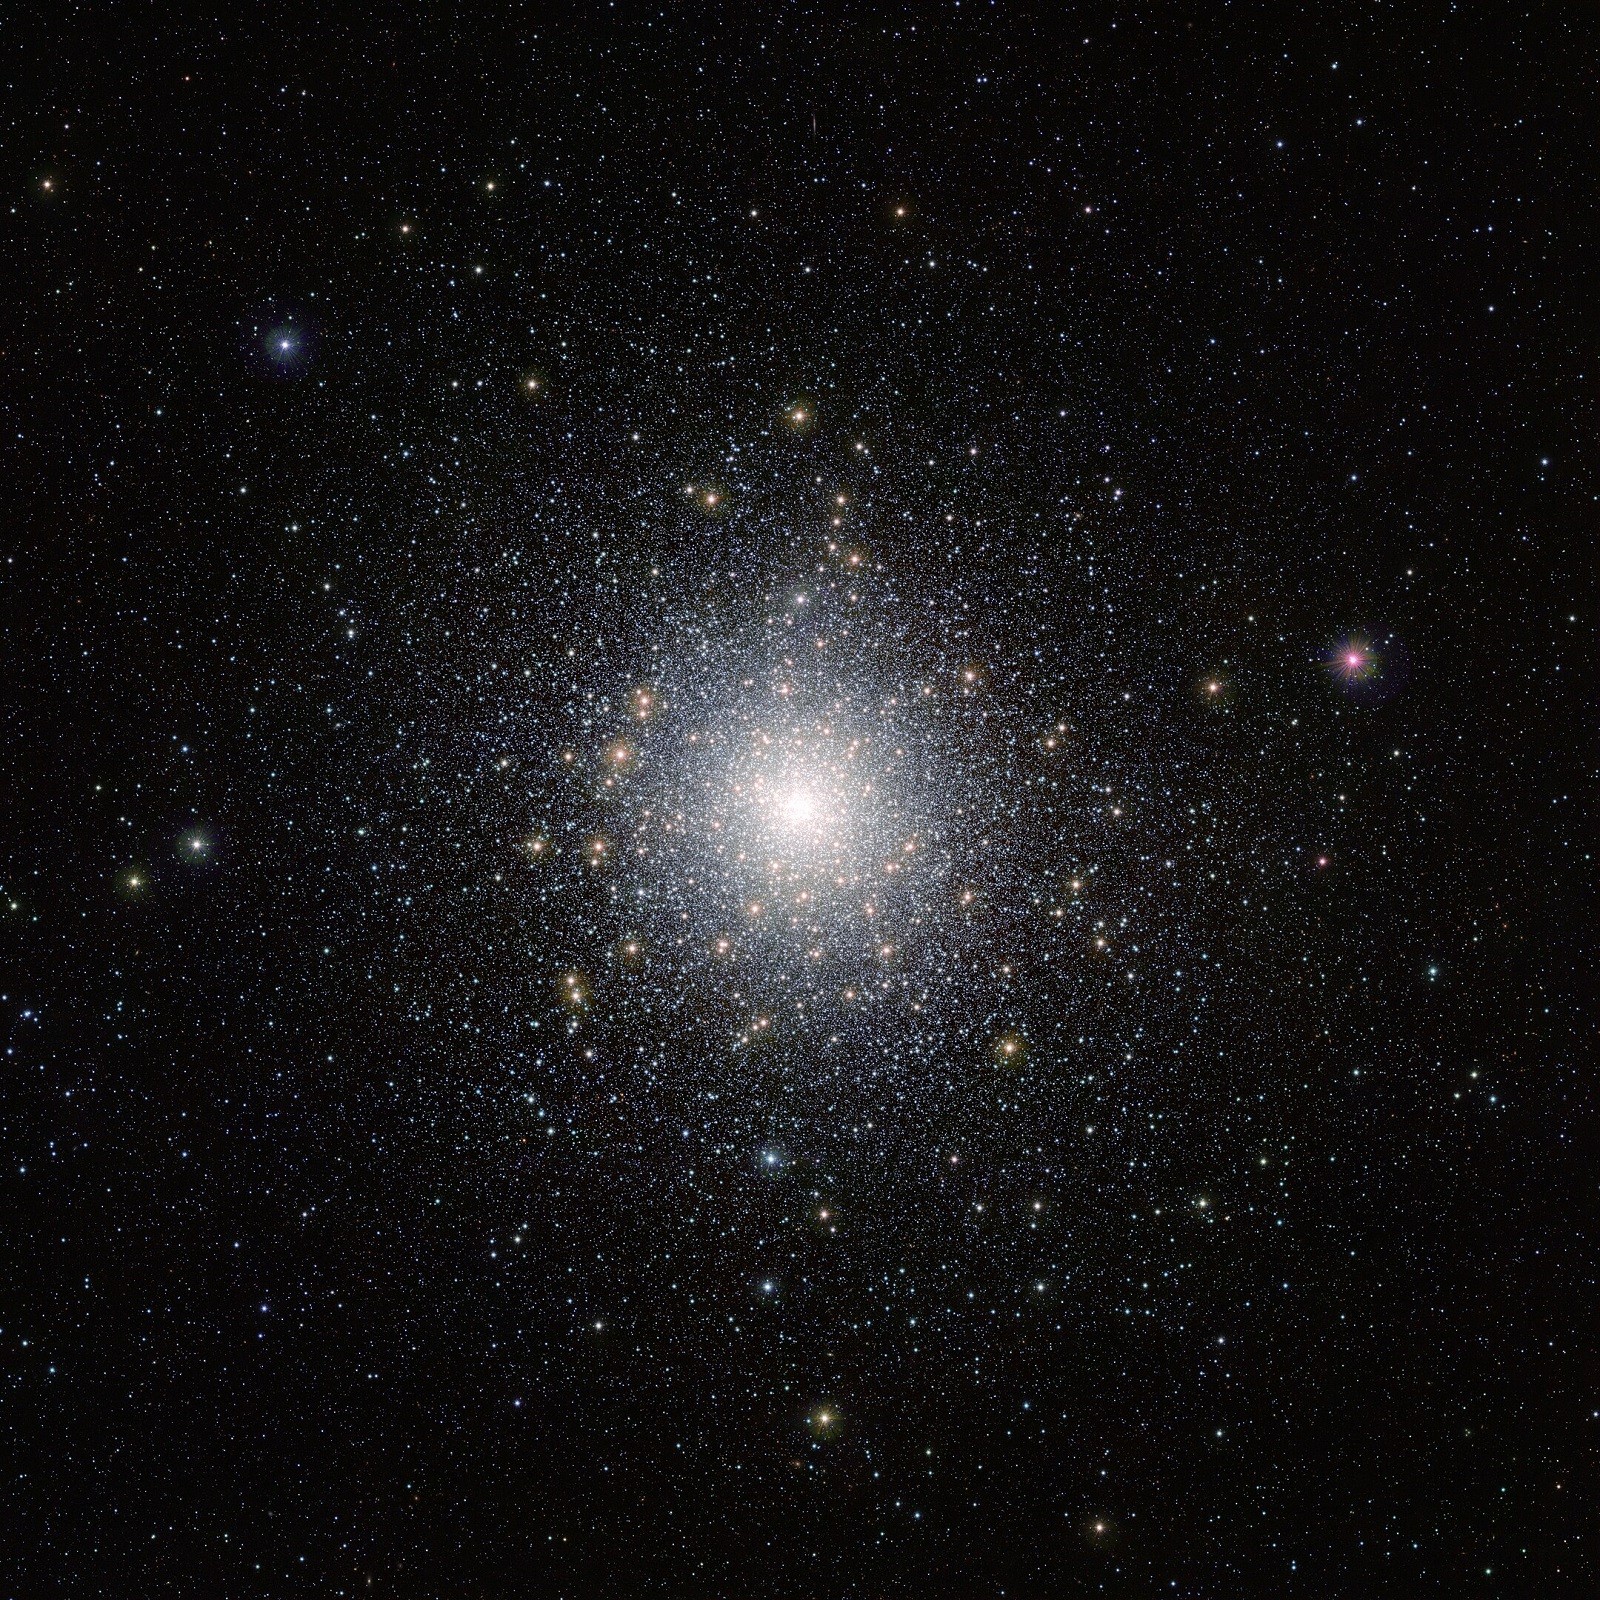 This bright cluster of stars is 47 Tucanae (NGC 104), shown here in an image taken by ESO’s VISTA (Visible and Infrared Survey Telescope for Astronomy) from the Paranal Observatory in Chile. This cluster is located around 15 000 light-years away from us and contains millions of stars, some of which are unusual and exotic. This image was taken as part of the VISTA Magellanic Cloud survey, a project that is scanning the region of the Magellanic Clouds, two small galaxies that are very close to our Milky Way.
